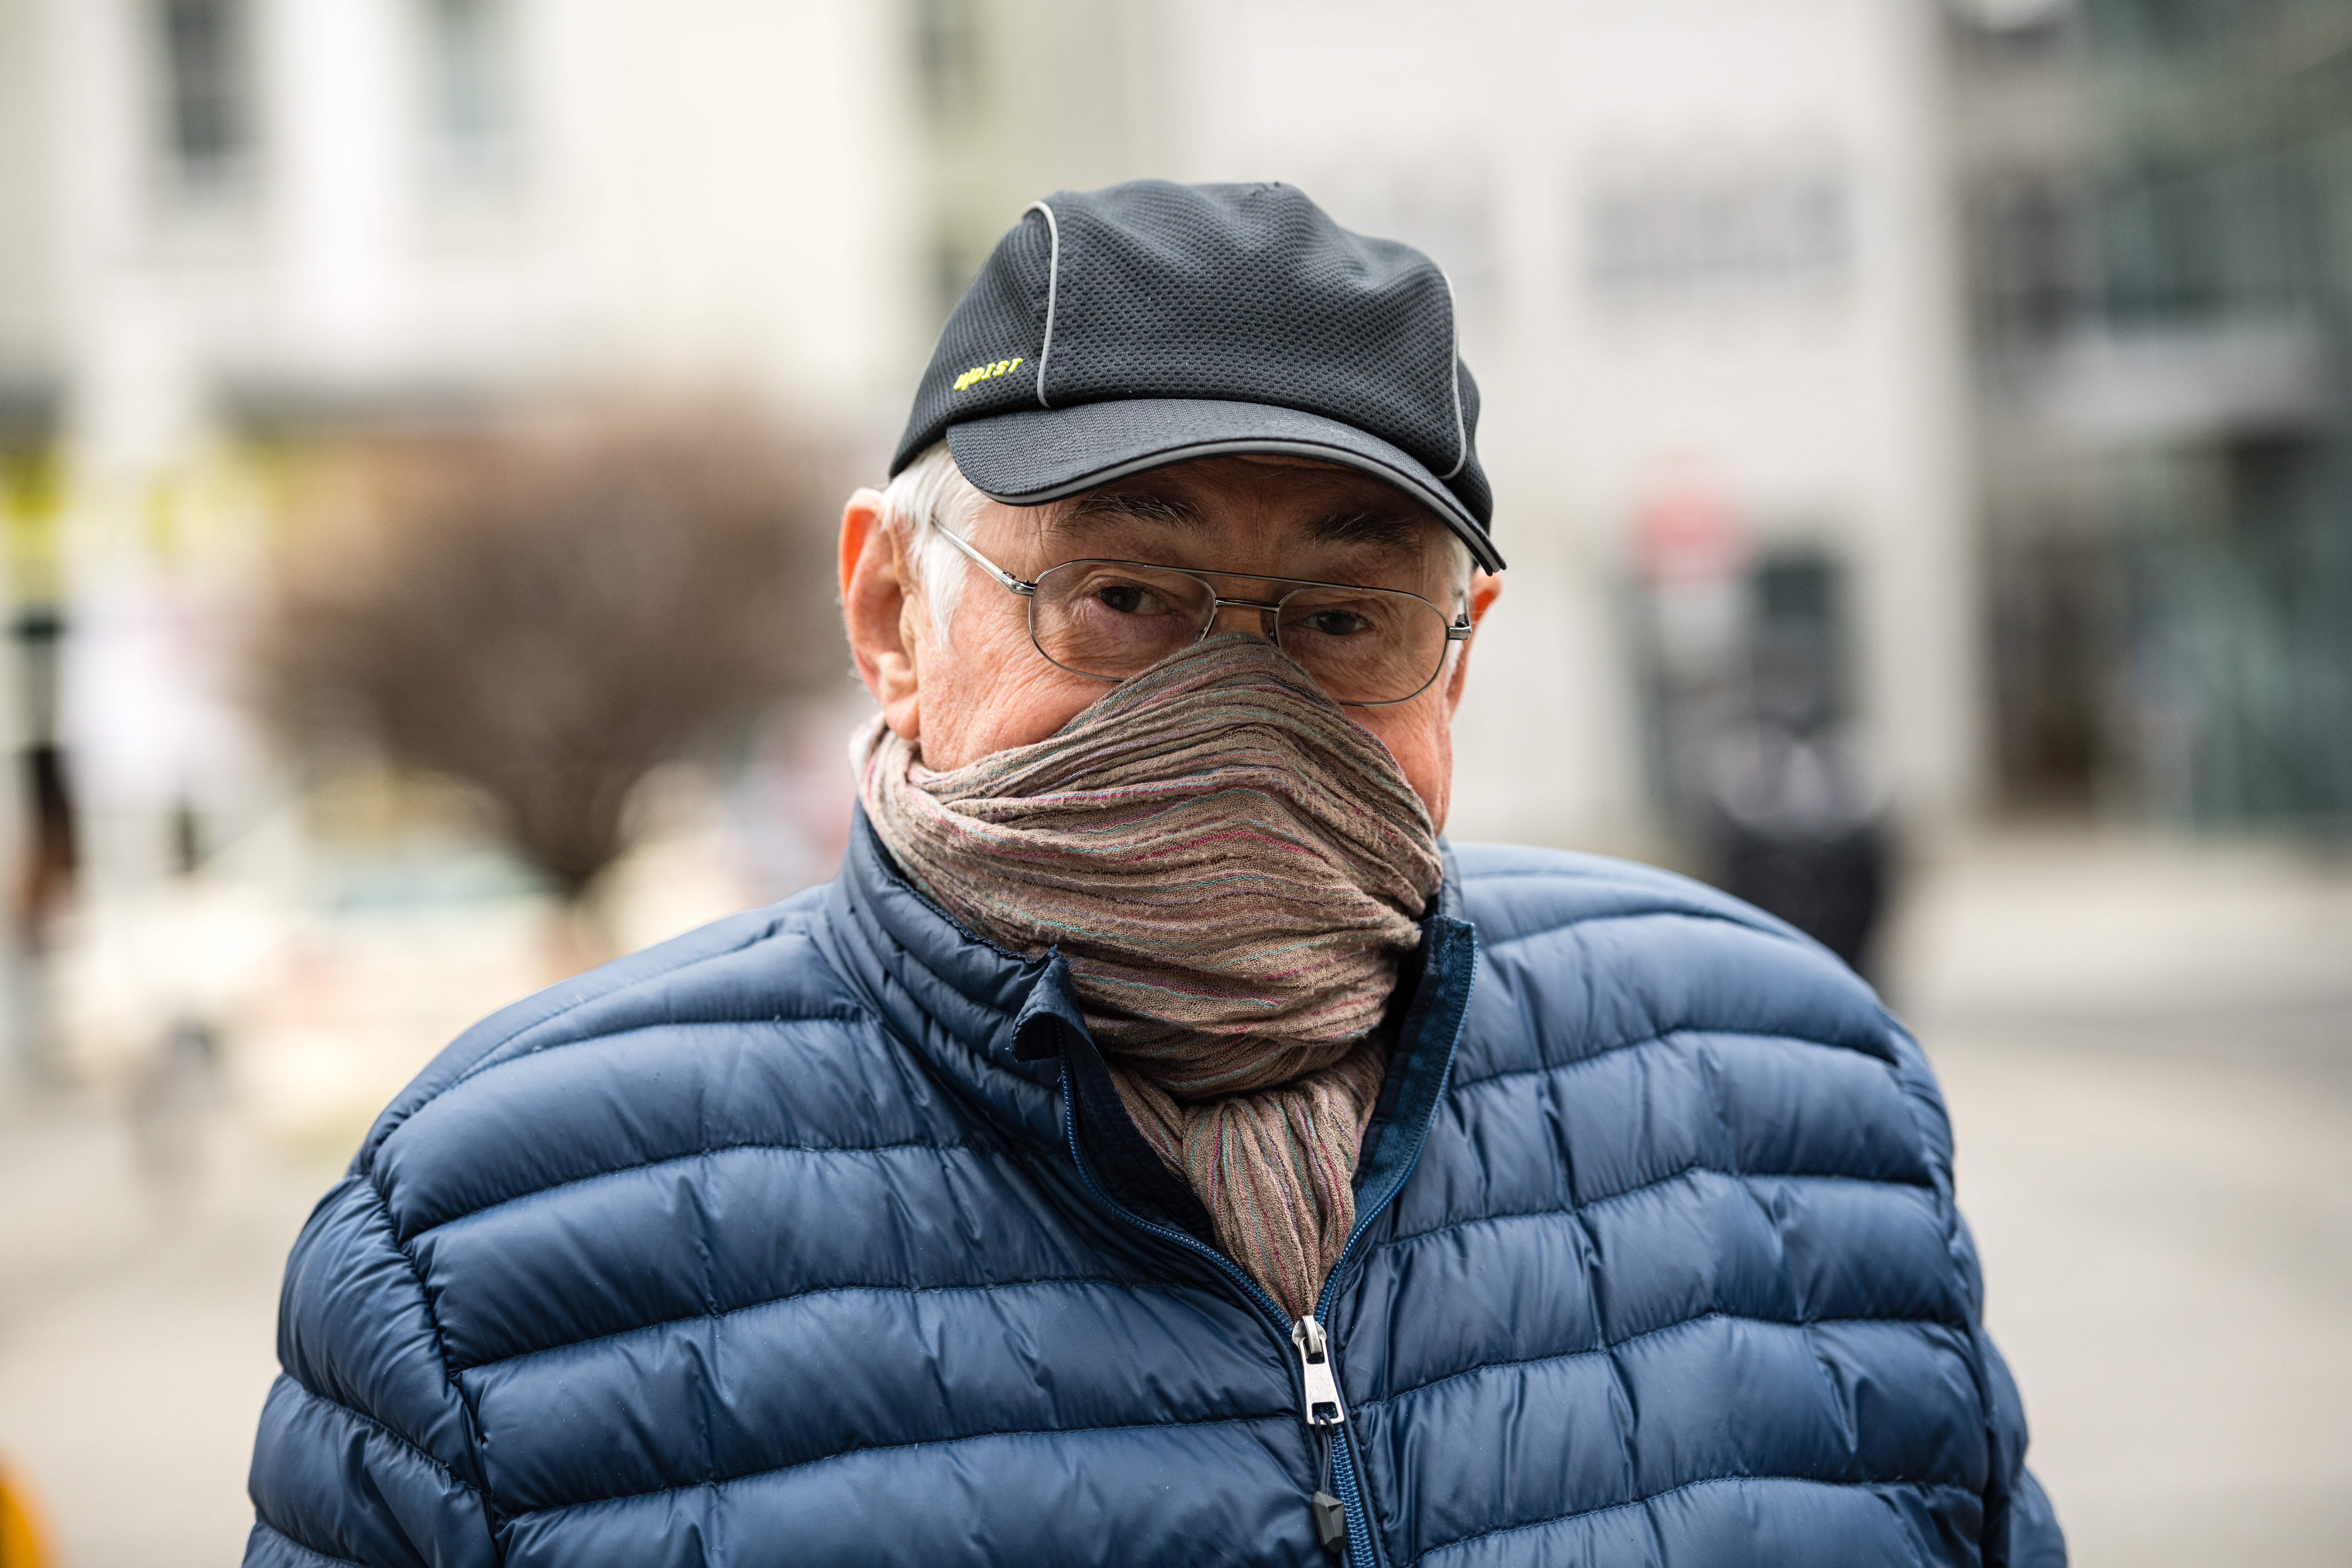 a mean wearing a hat and jacket with his scarf pulled over his mouth